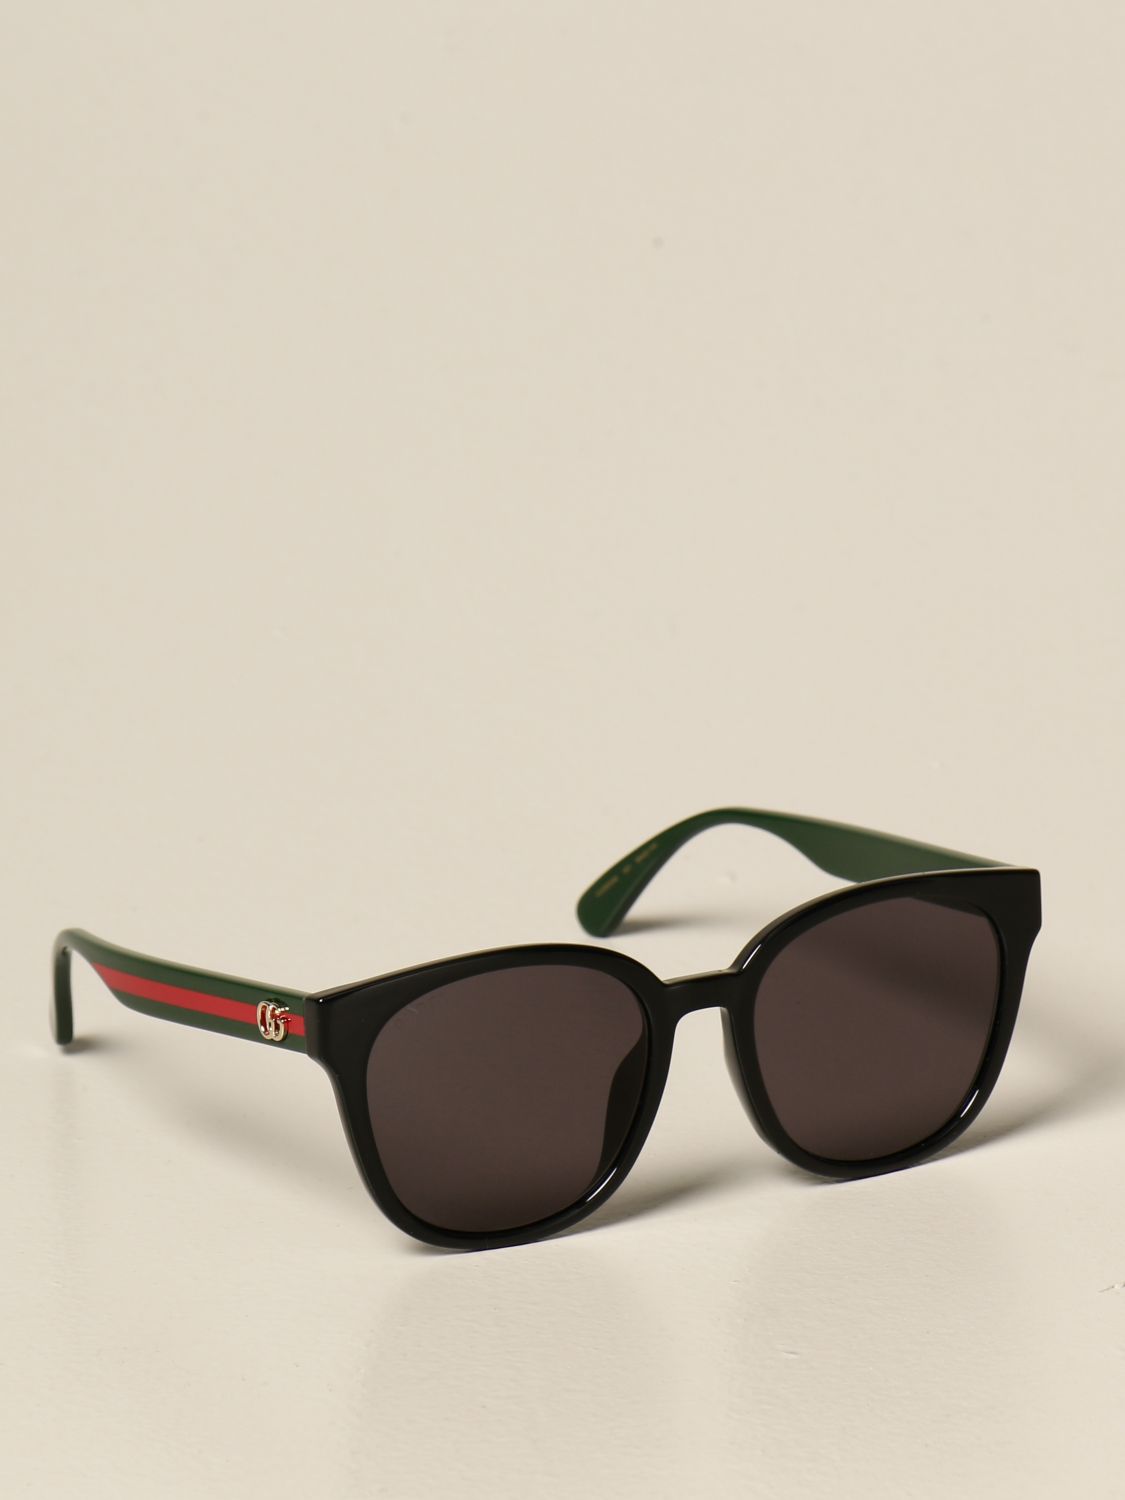 gucci sunglasses outlet uk